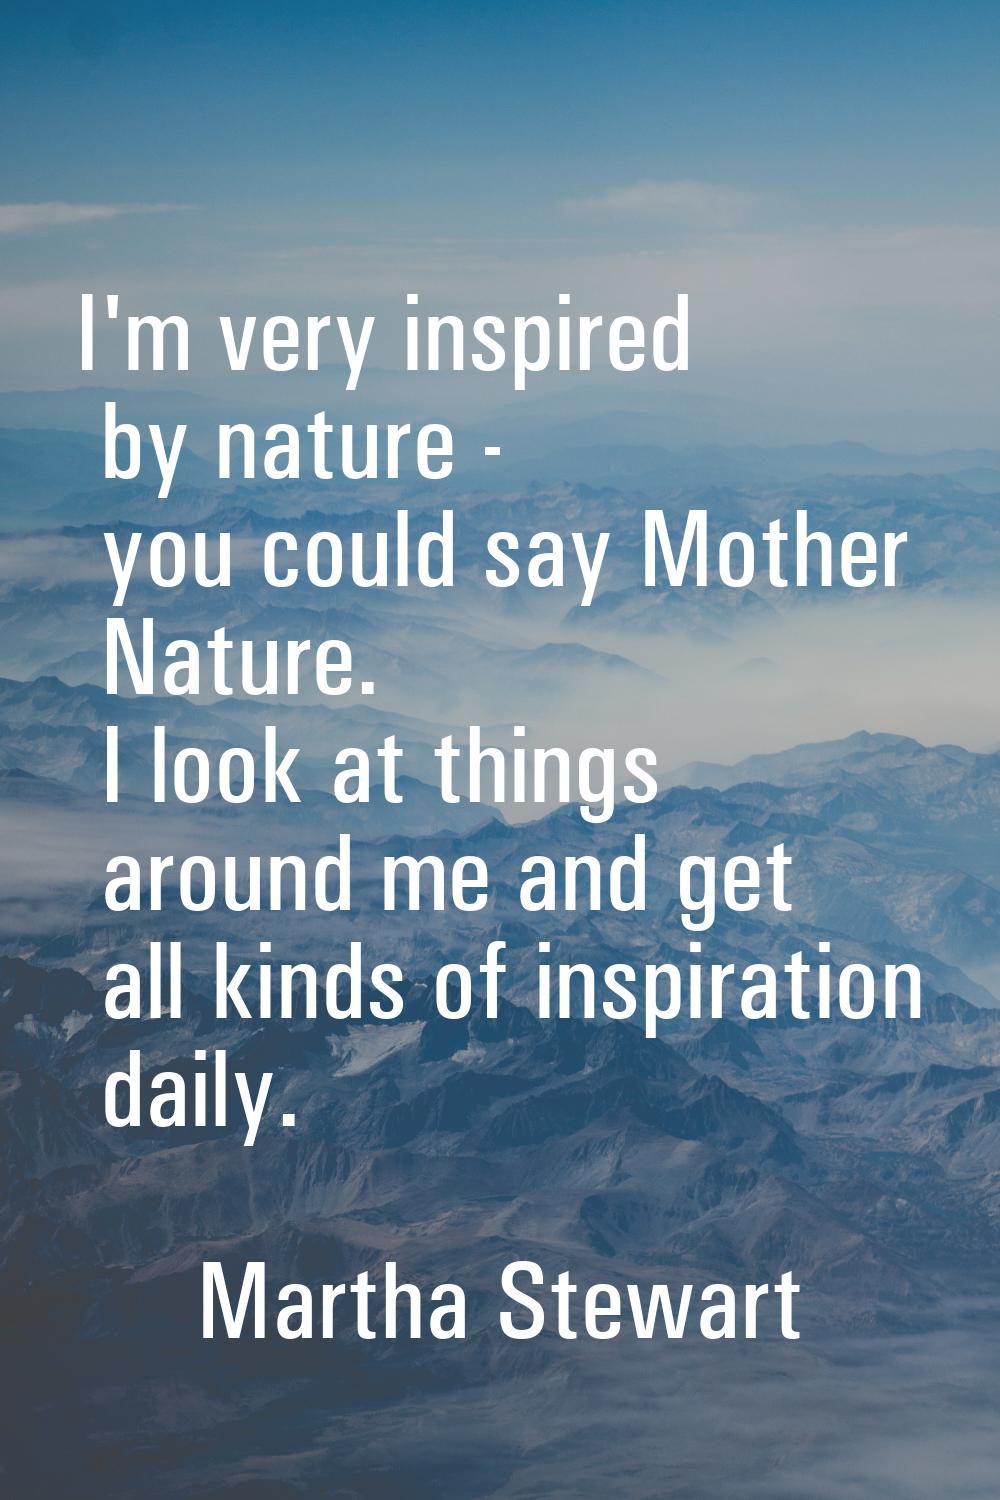 I'm very inspired by nature - you could say Mother Nature. I look at things around me and get all k